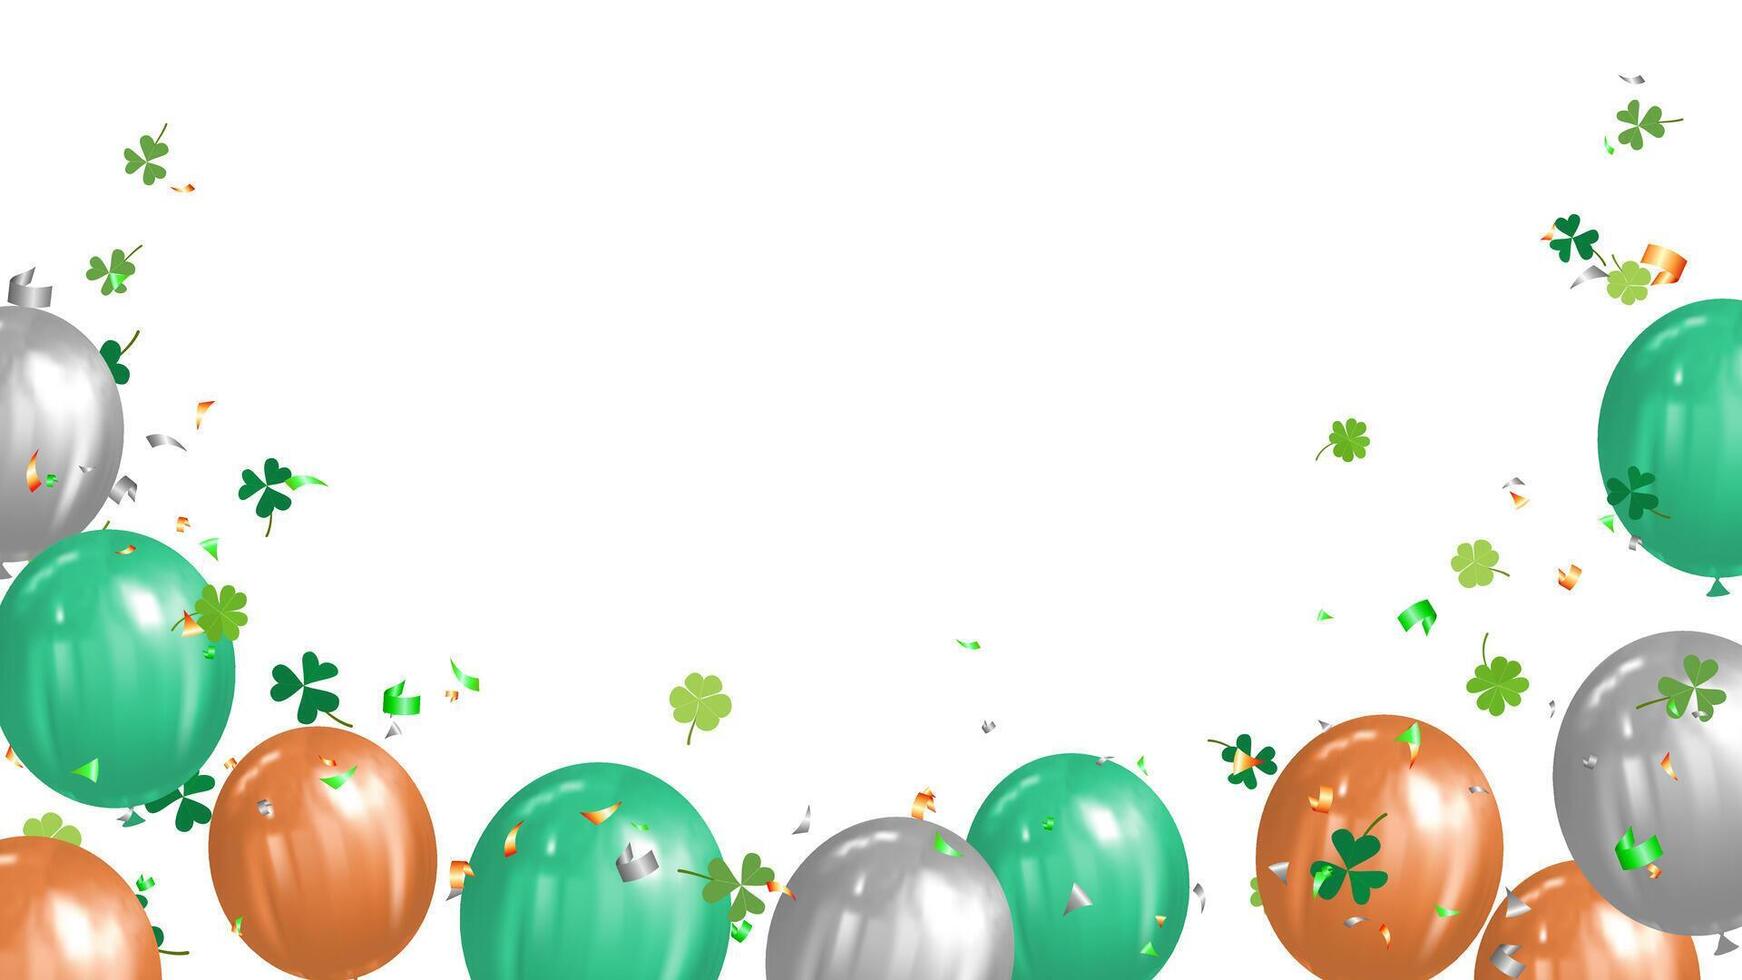 banner template background with balloons for Saint Patrick Day, holiday, celebration, party vector illustration